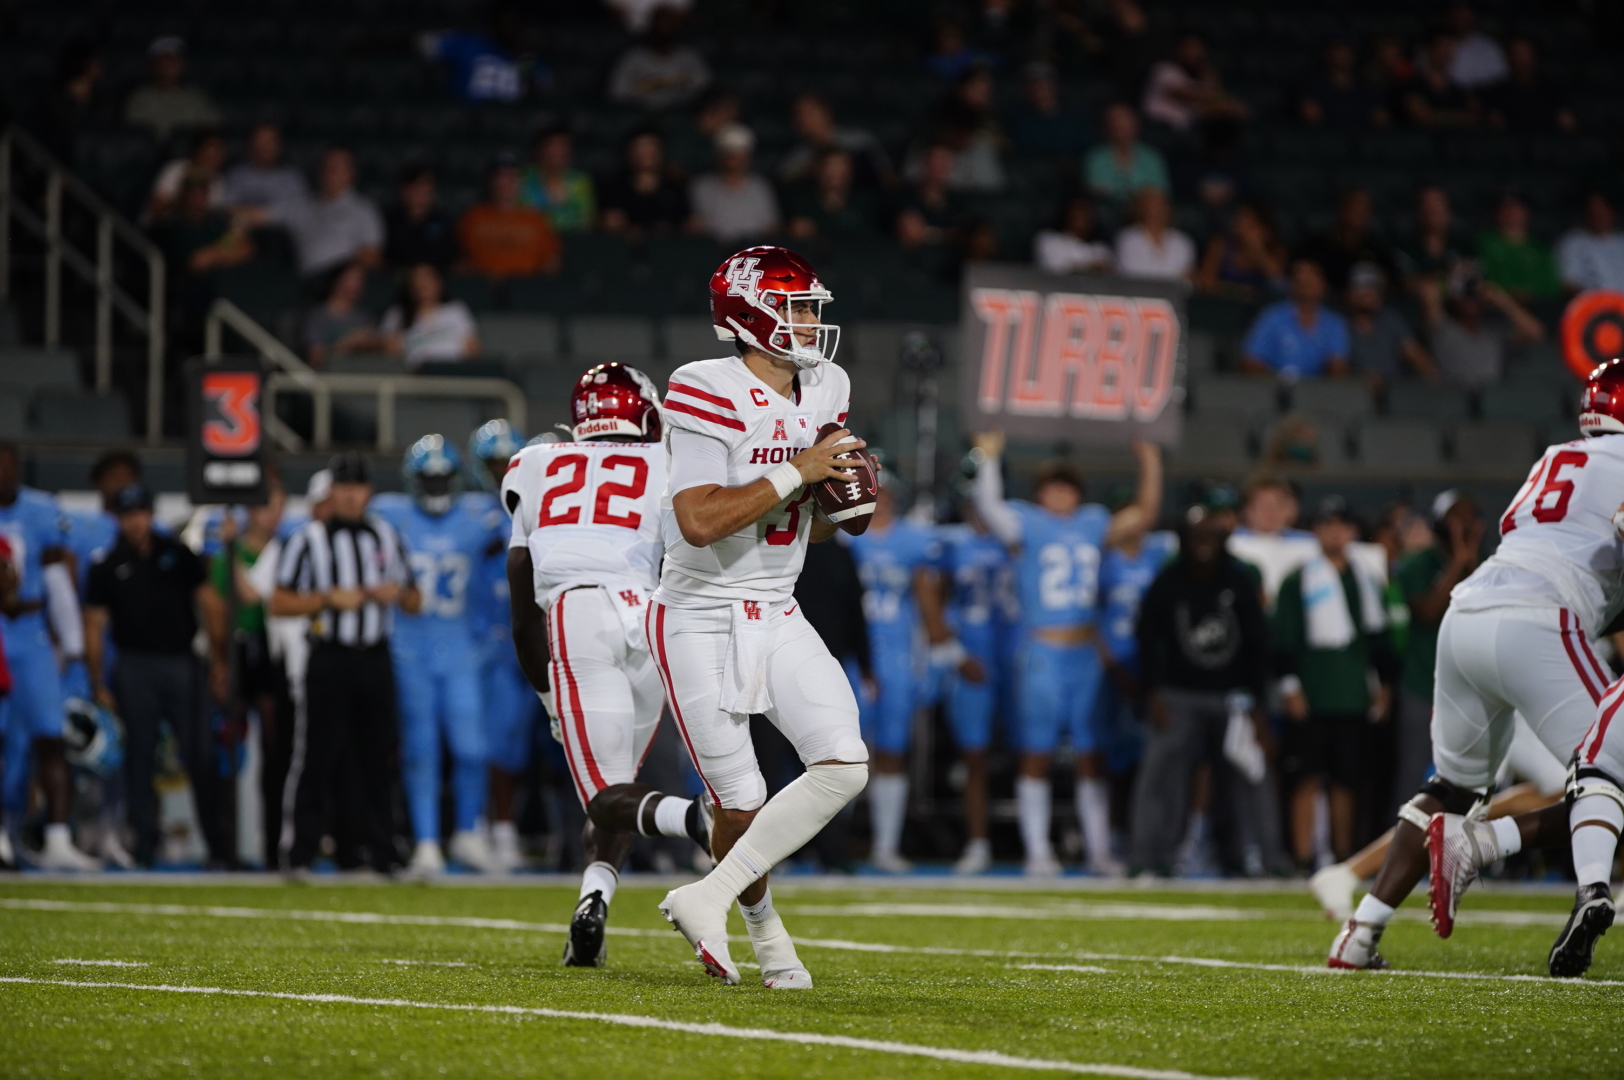 UH quarterback Clayton Tune has thrown for more than 1,200 yards and 10 touchdowns in 2021. | Courtesy of UH athletics